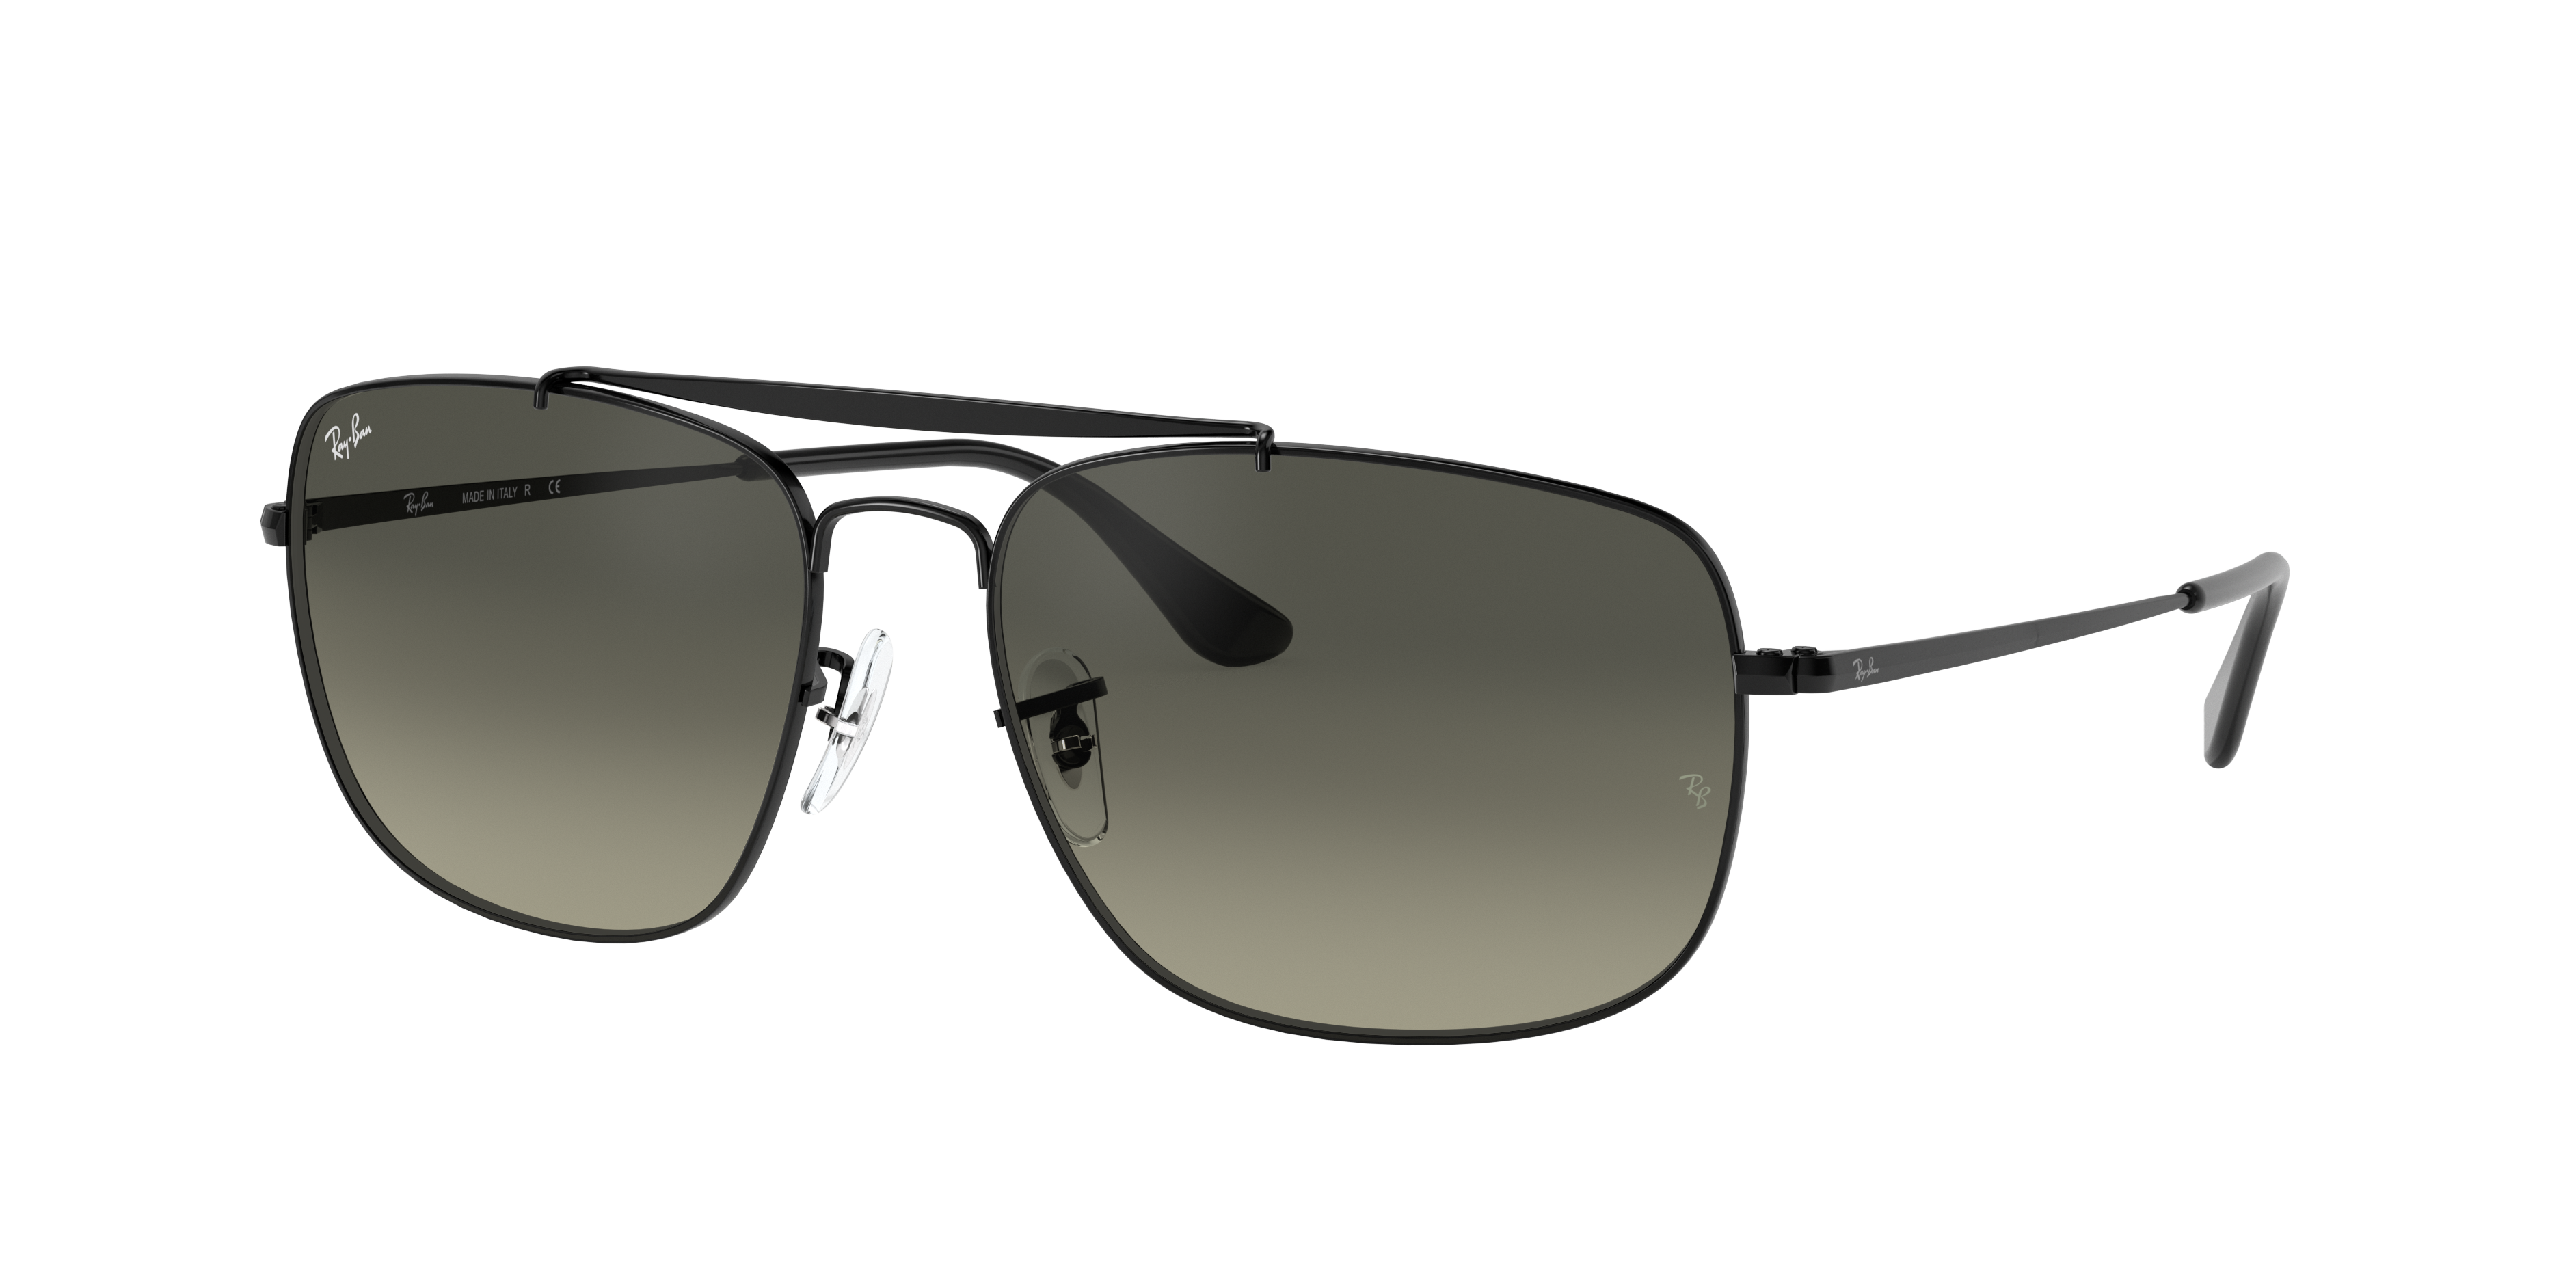 Colonel Sunglasses in Black and Grey | Ray-Ban®